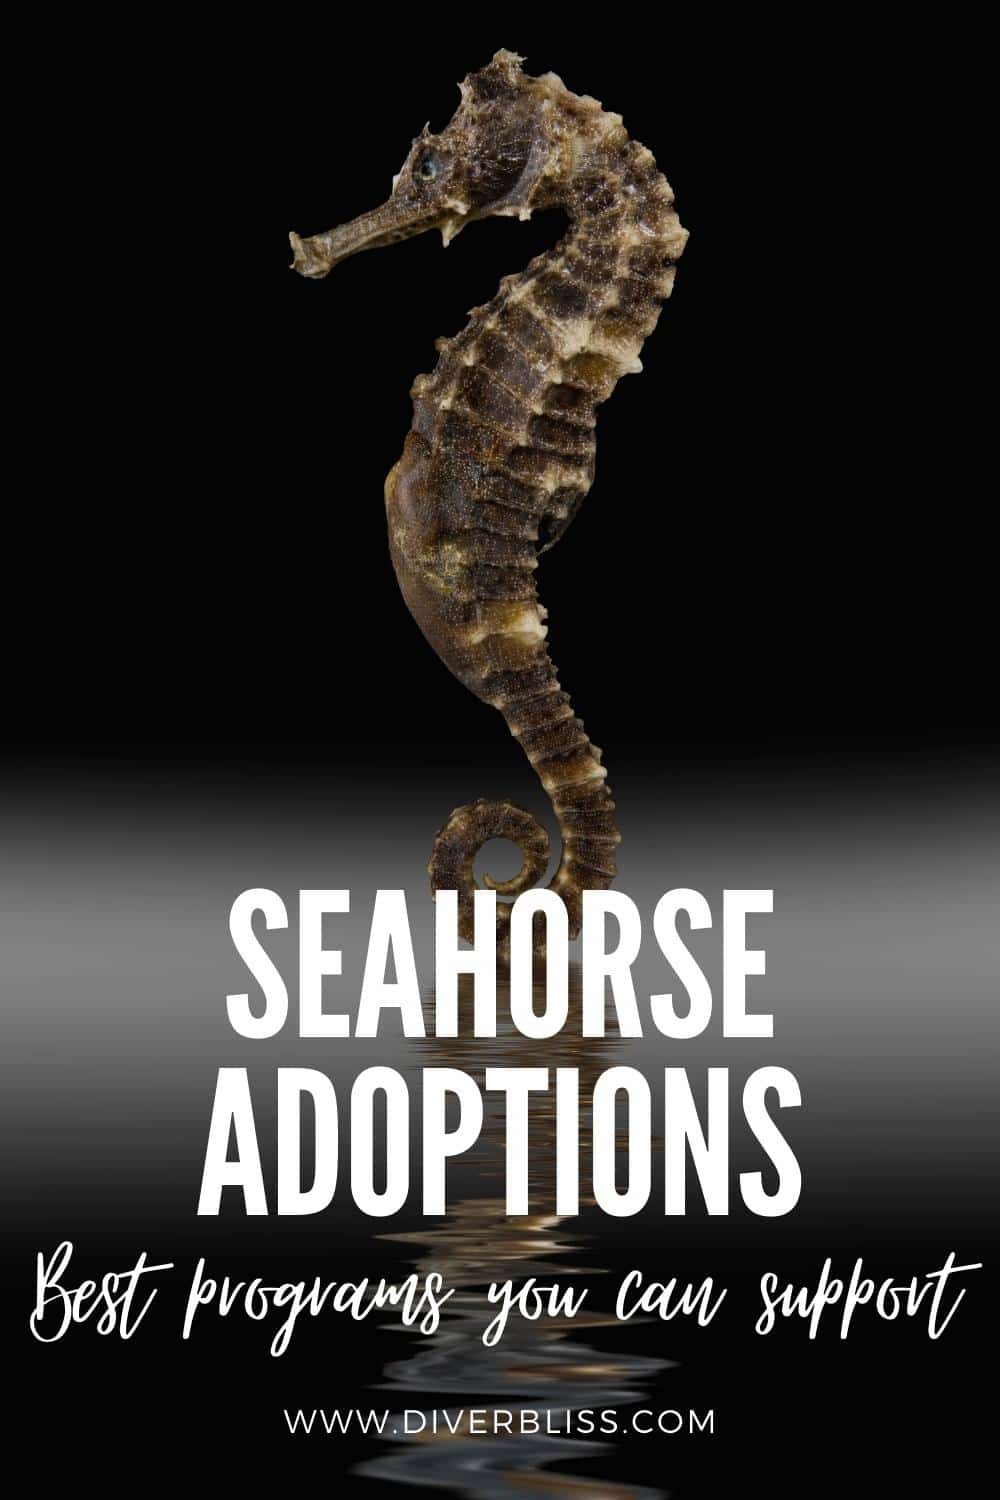 seahorse adoptions: best programs you can support